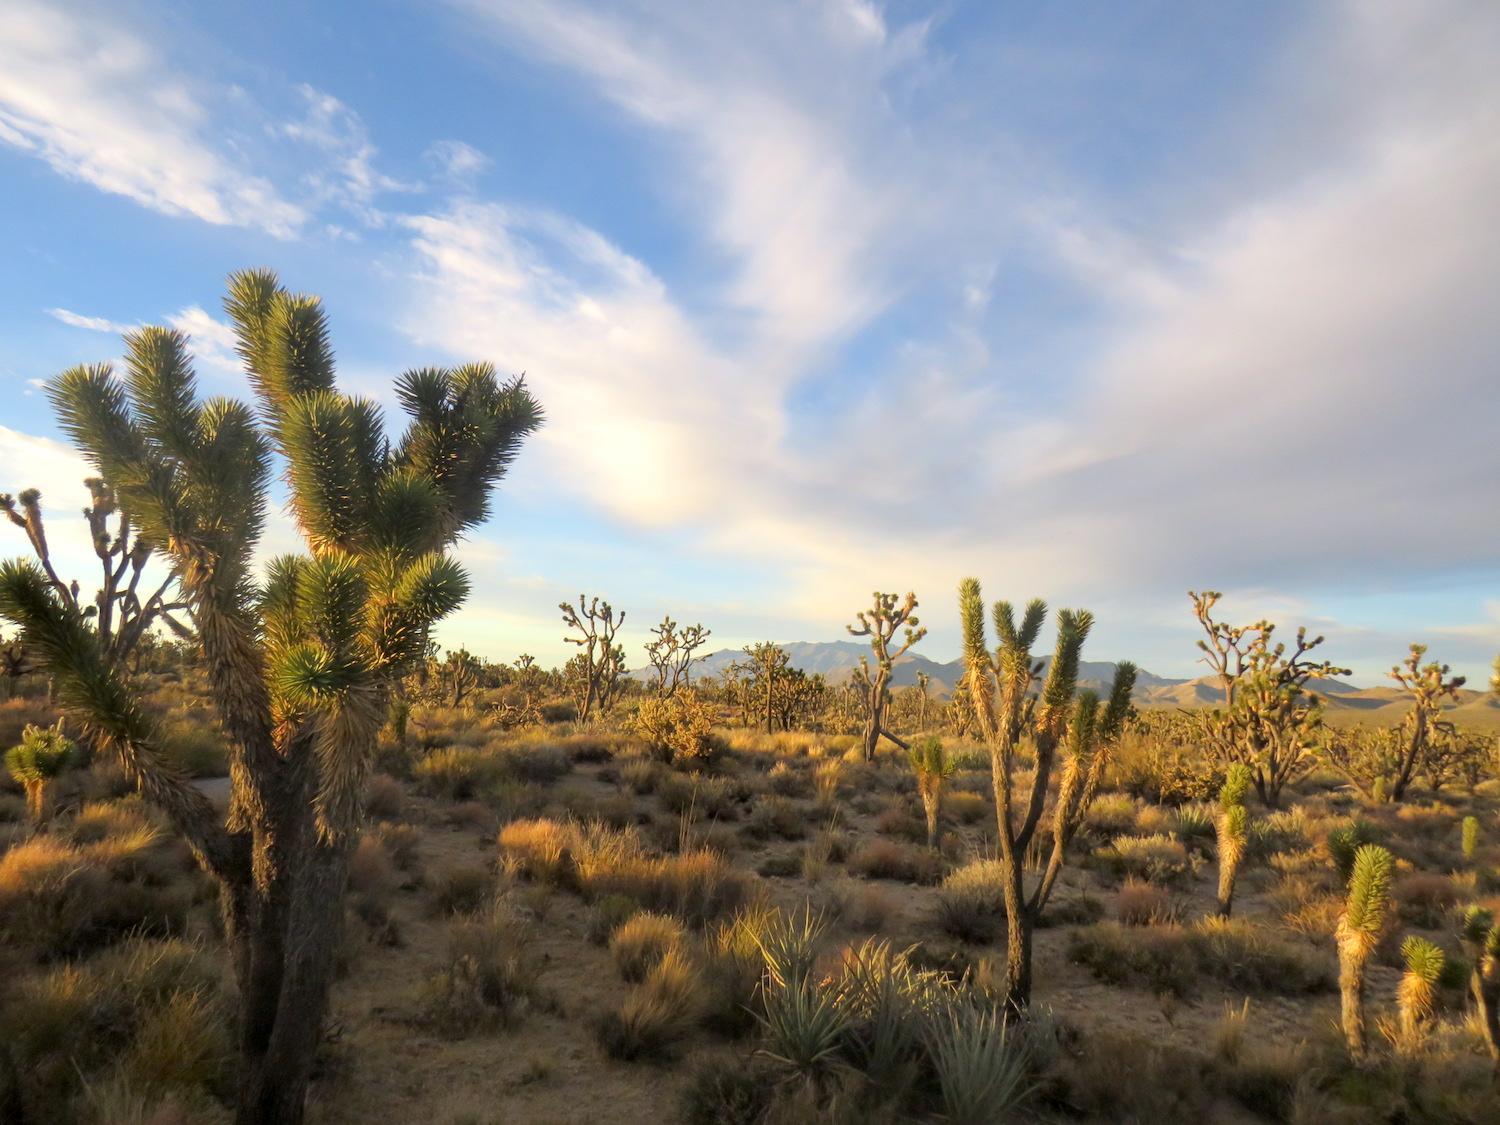 The Joshua tree forest was a magical place to explore before the Dome Fire/Hilary Clark